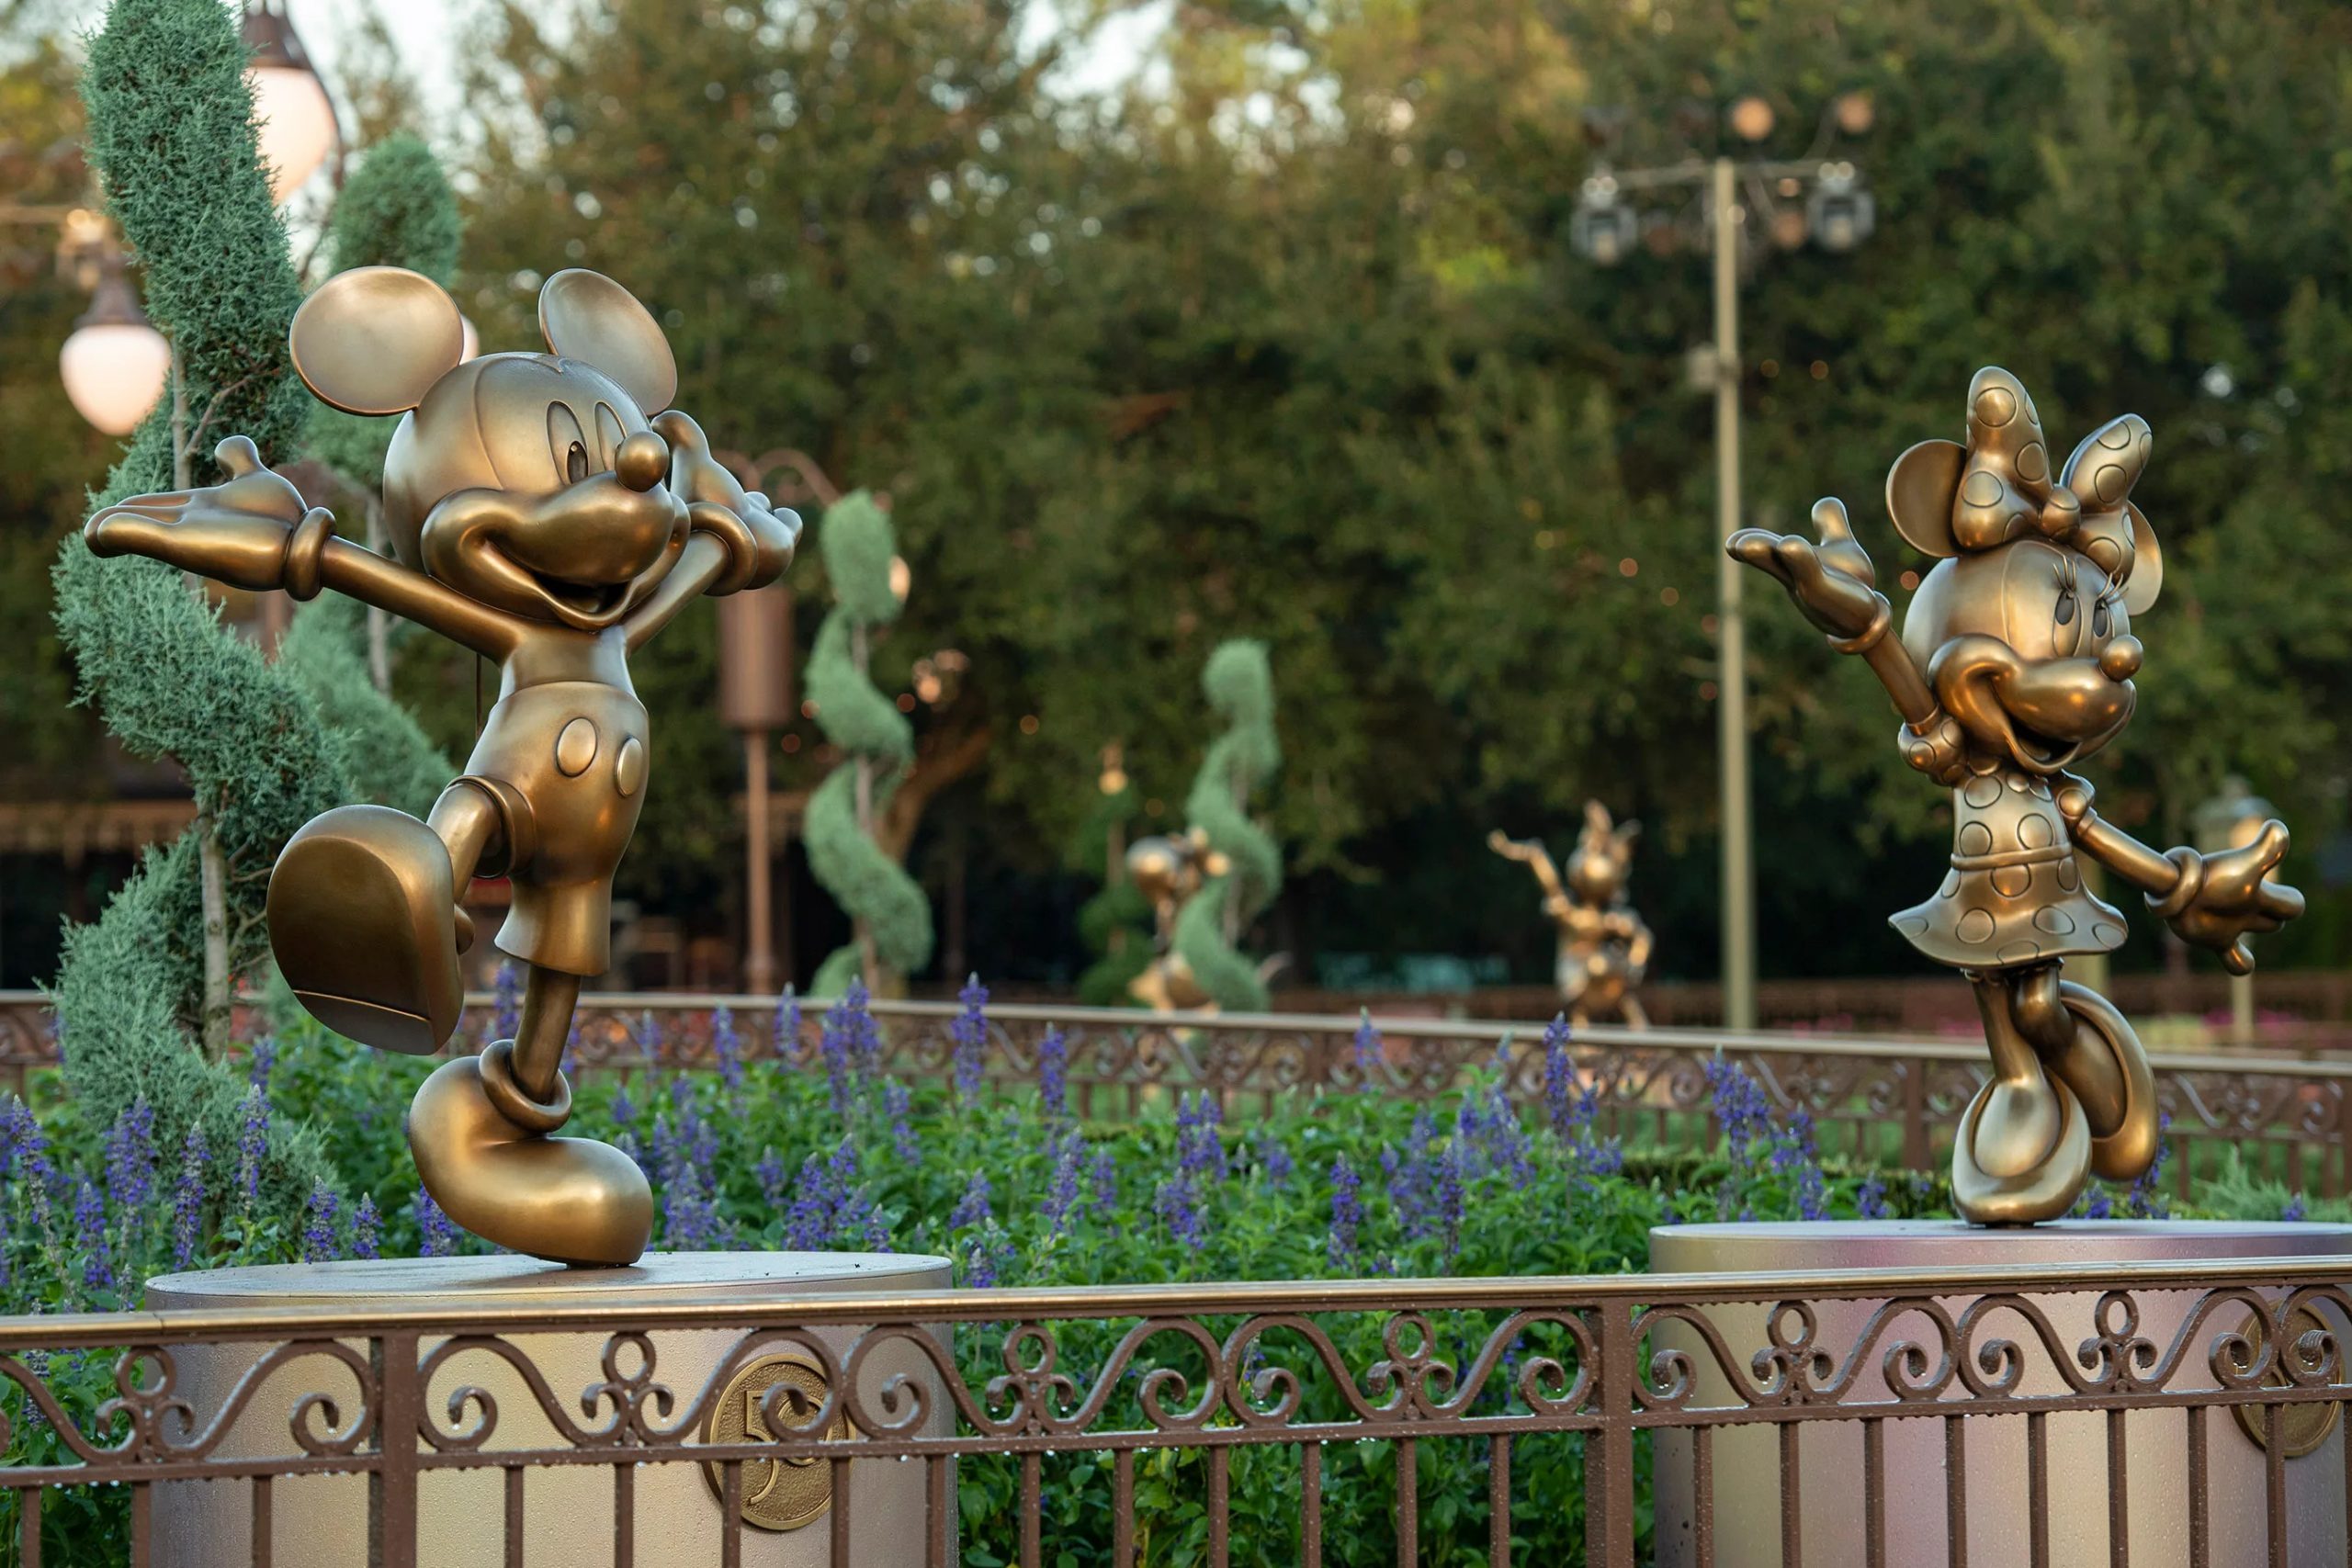  Disney Worlds 50th Anniversary: How the Parks Are Celebrating